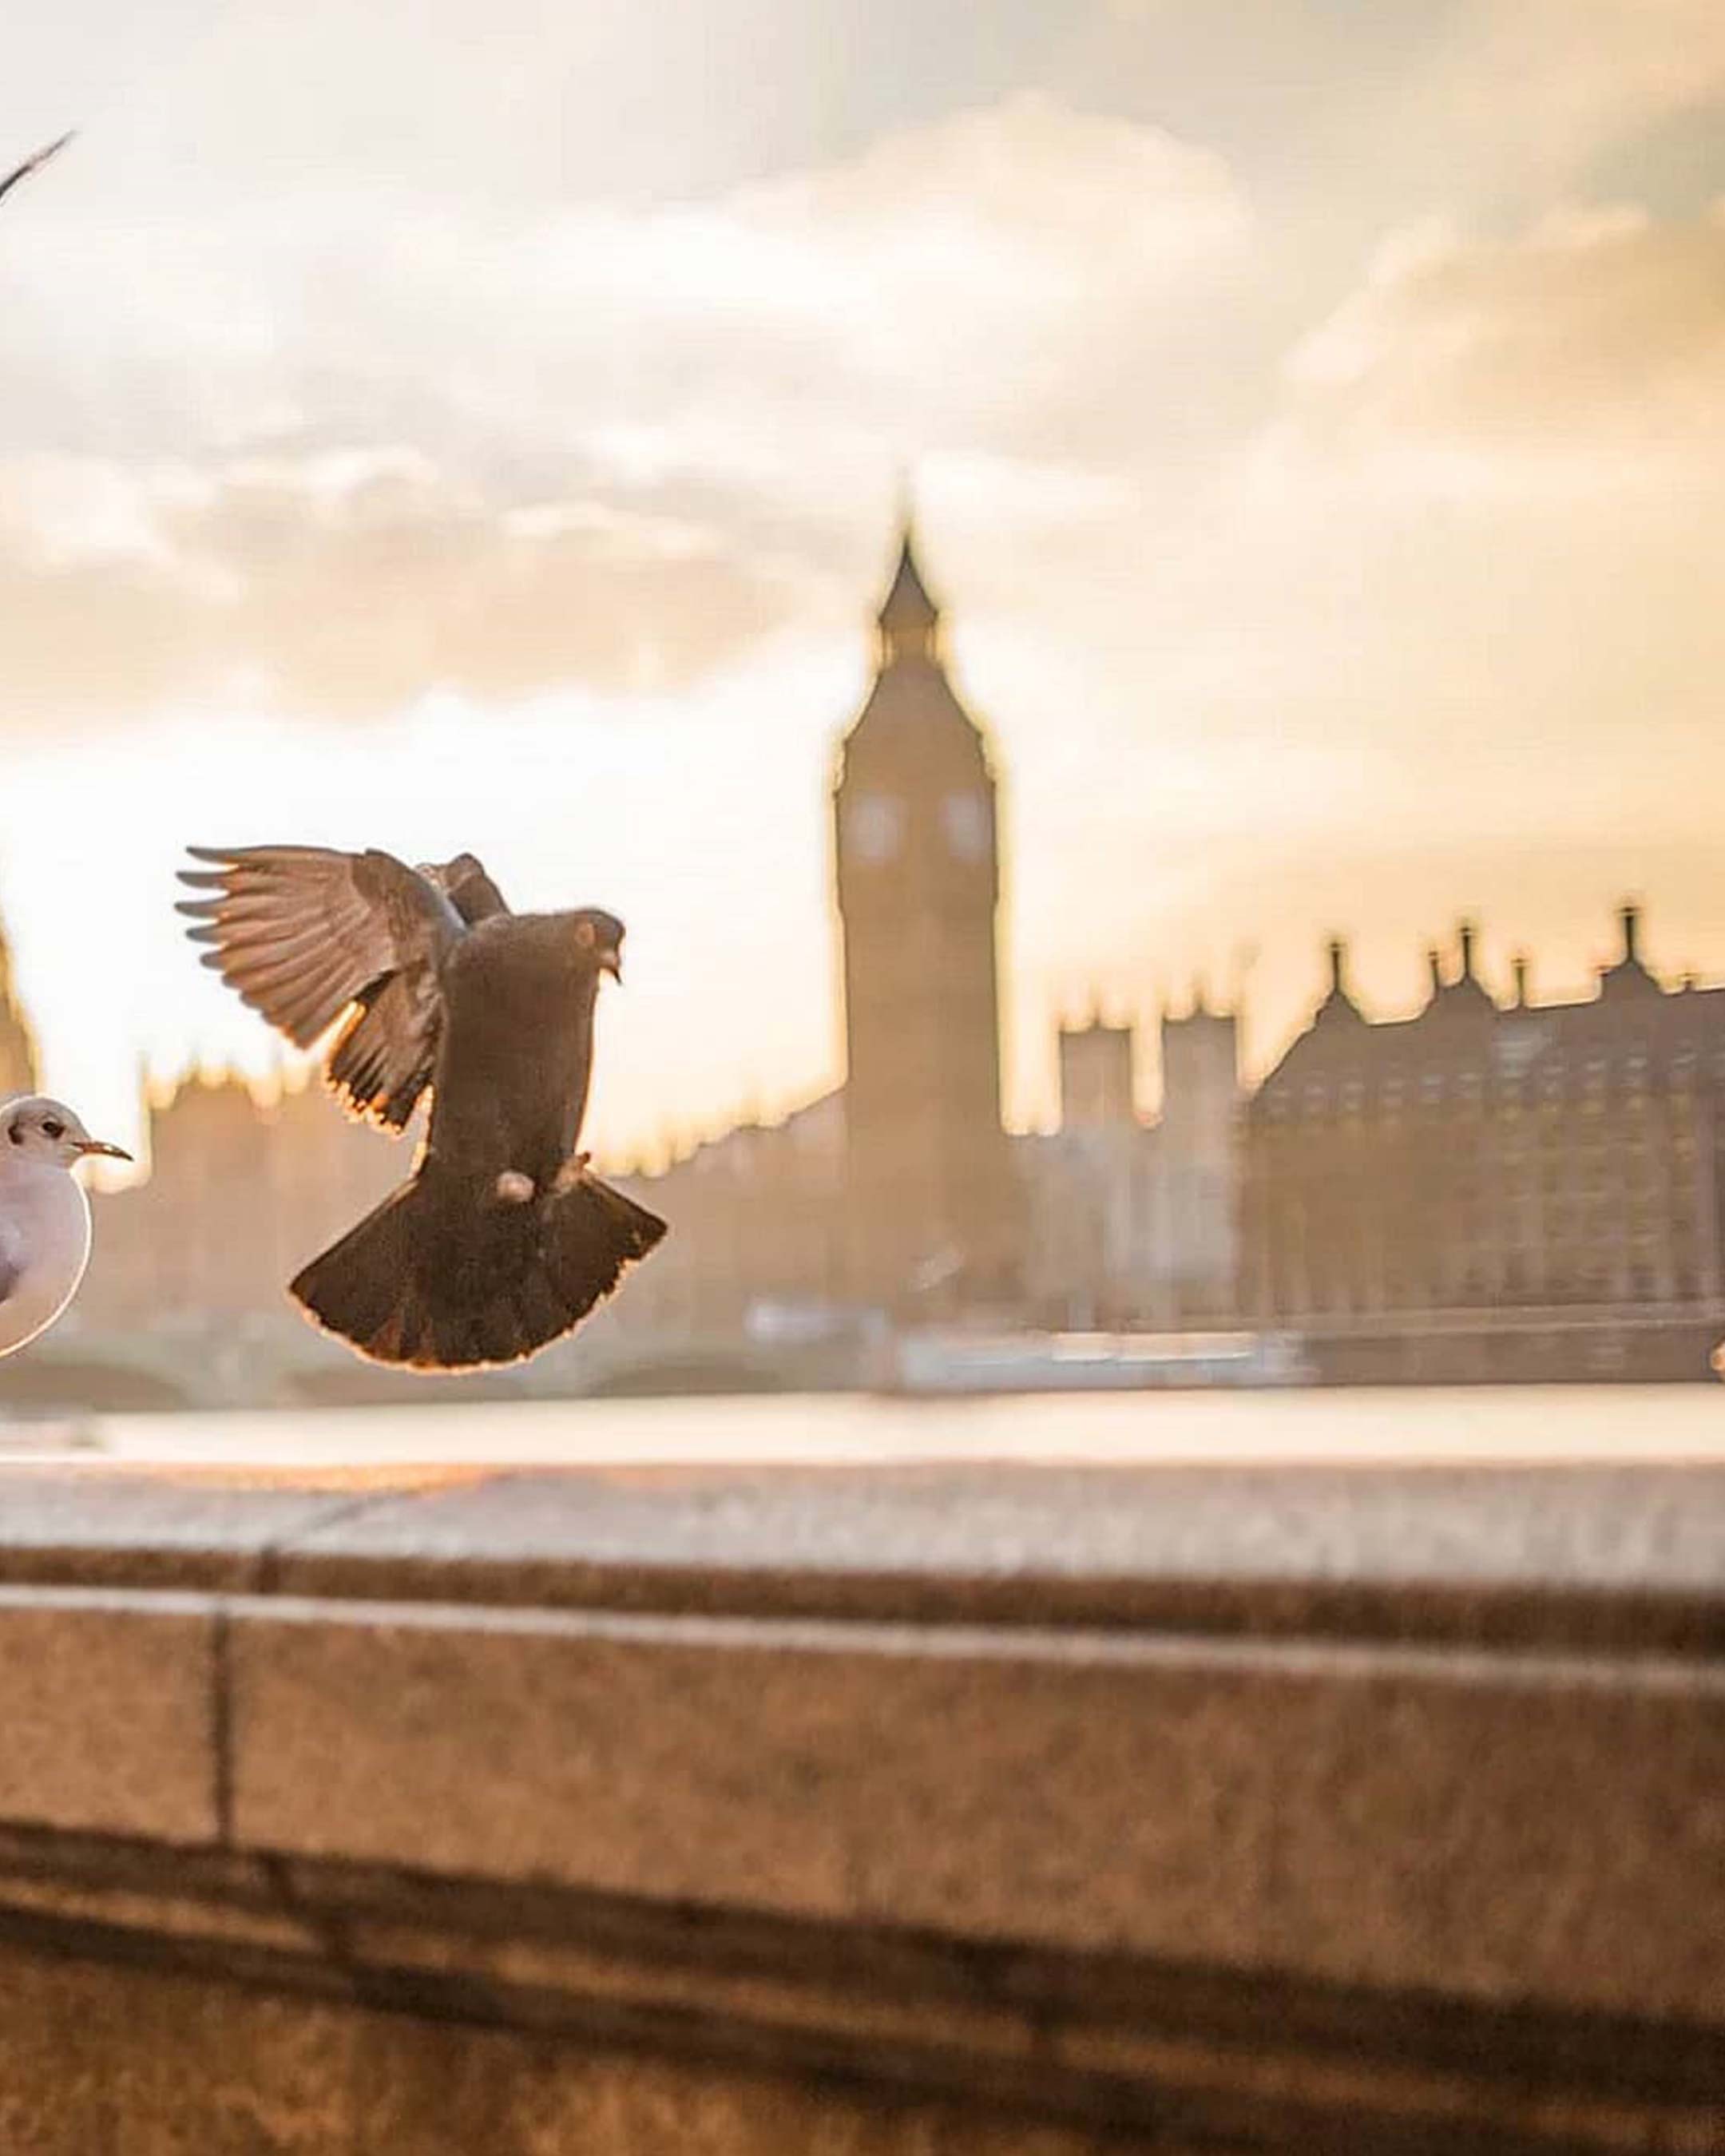 Pigeon In London Photo Editing Background Free Stock Image